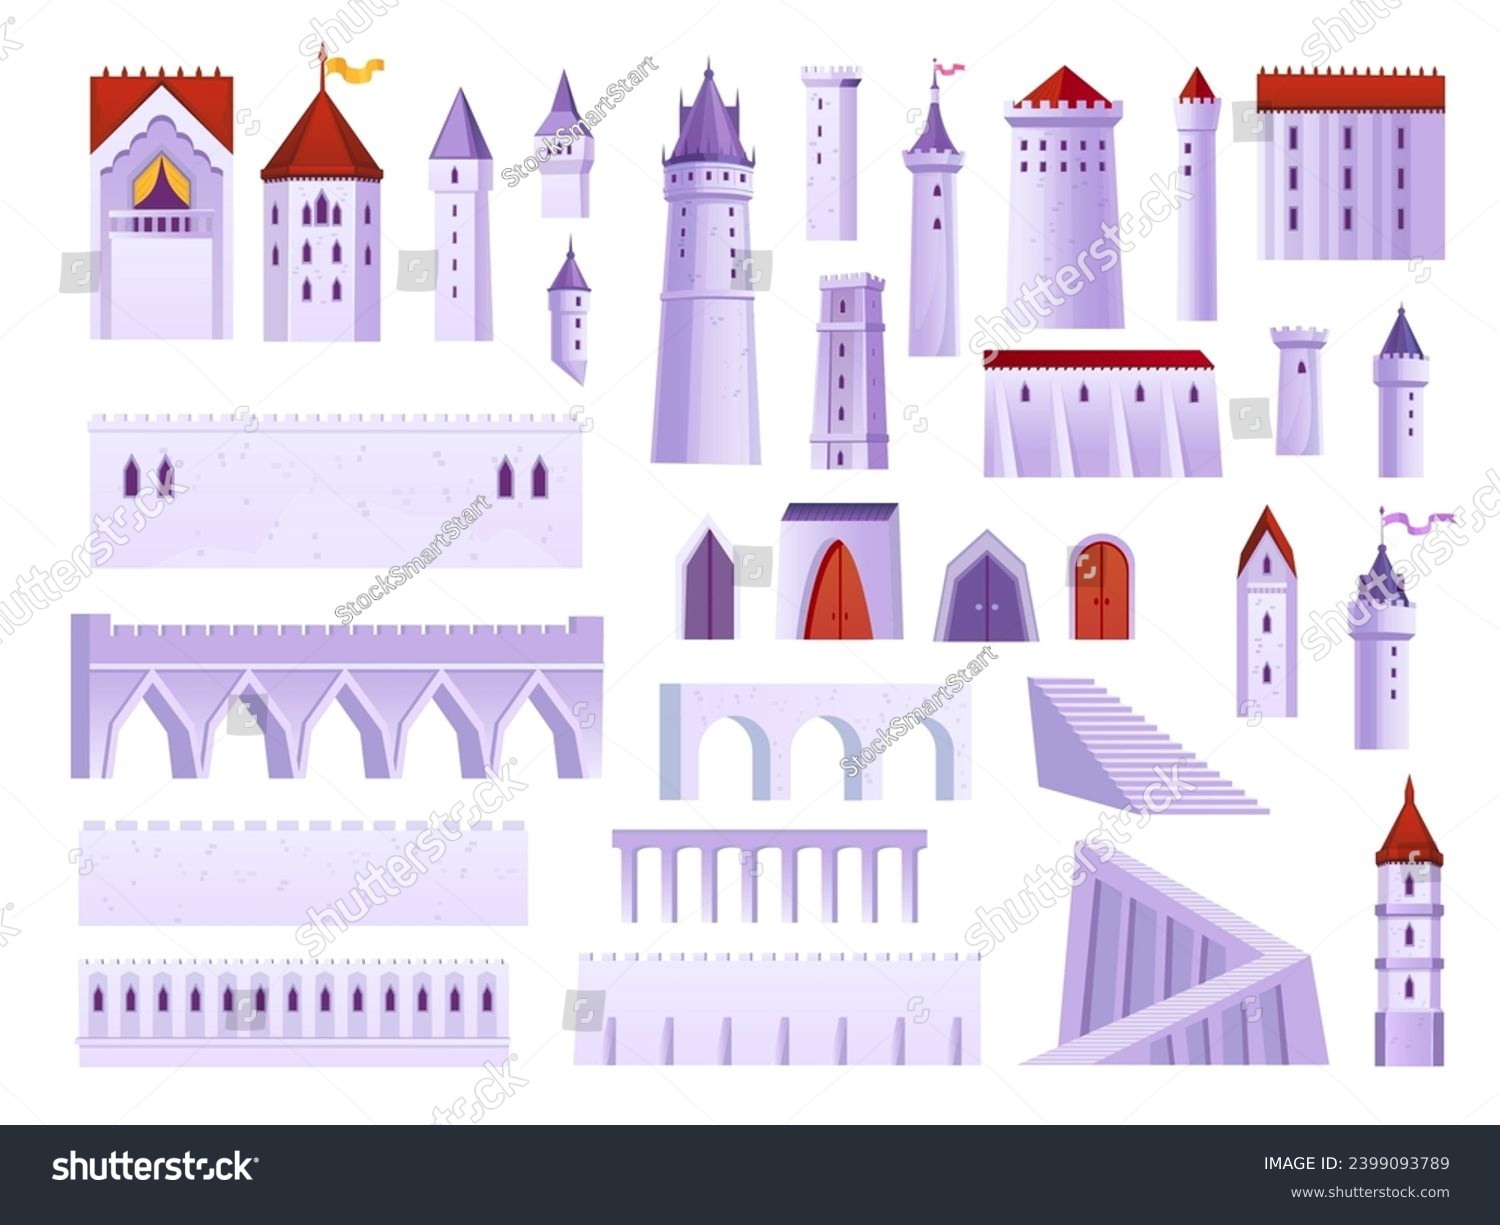 SVG of Castle constructor. Medieval castles elements bastion simple construction, fortified tower spire ancient fairy kingdom town fortress bridge, cartoon ingenious vector illustration of building medieval svg